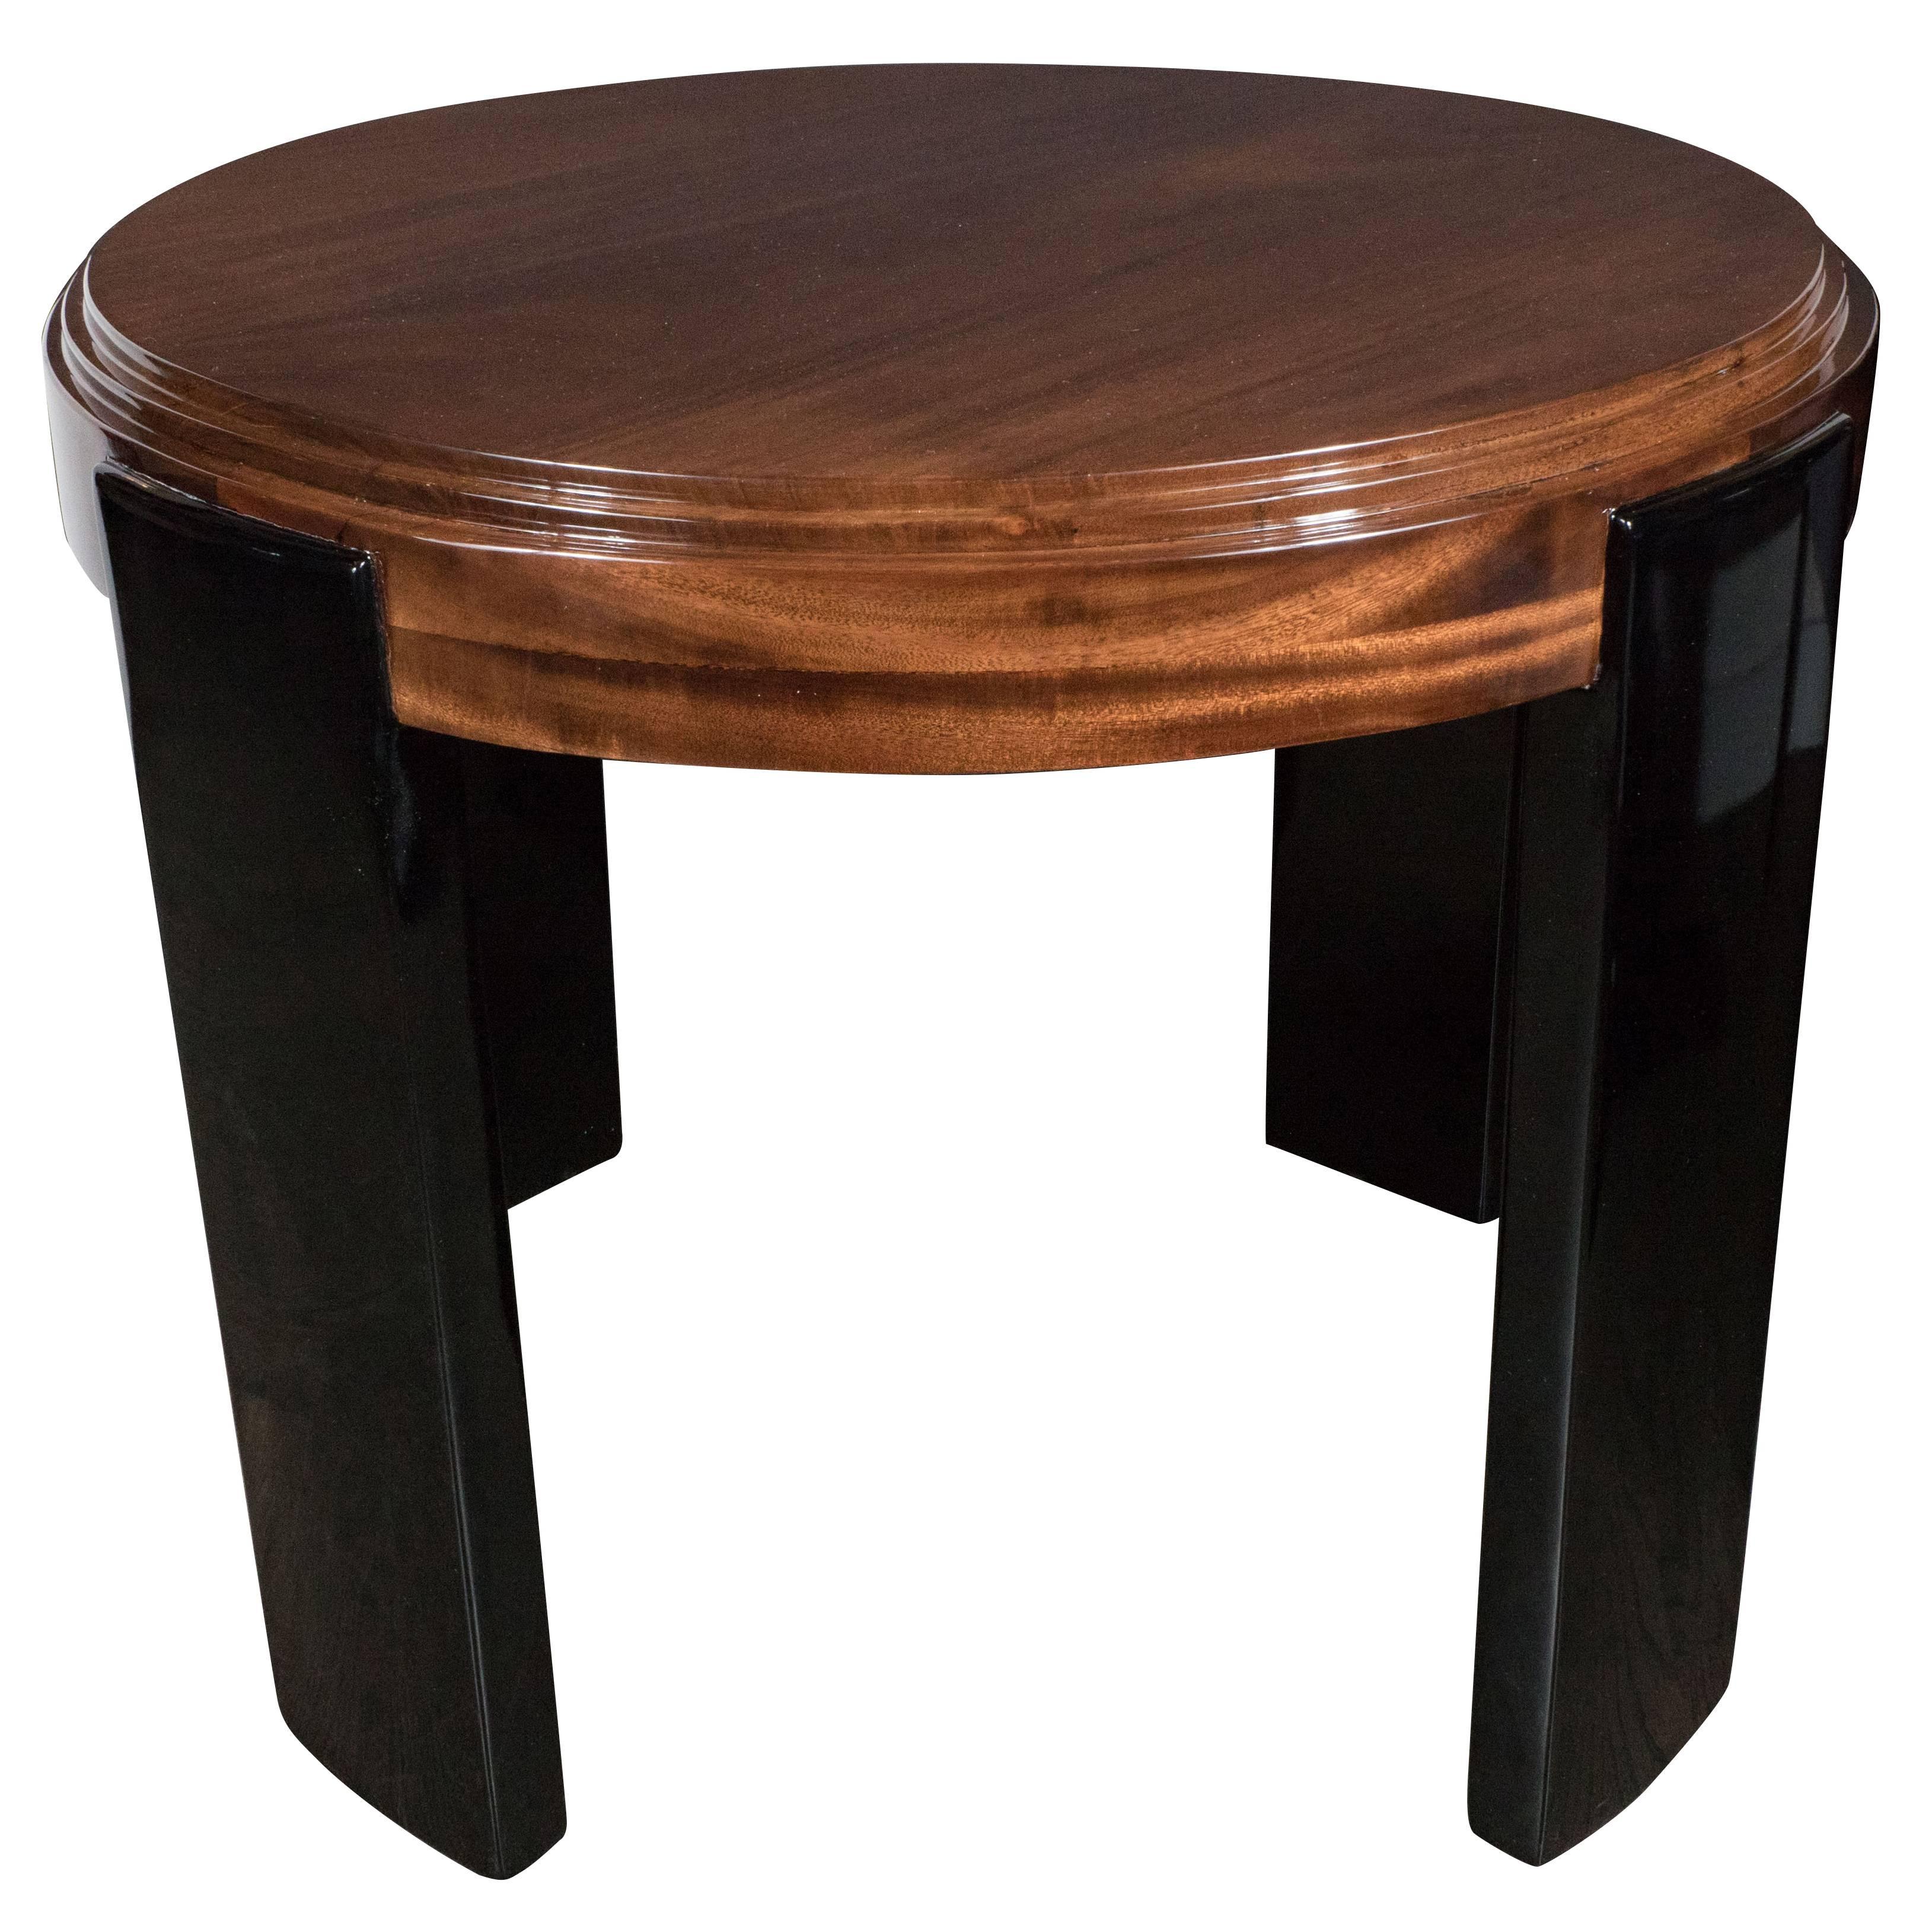 Art Deco Skyscraper Style Stepped Detail Side Table with Black Lacquer Legs